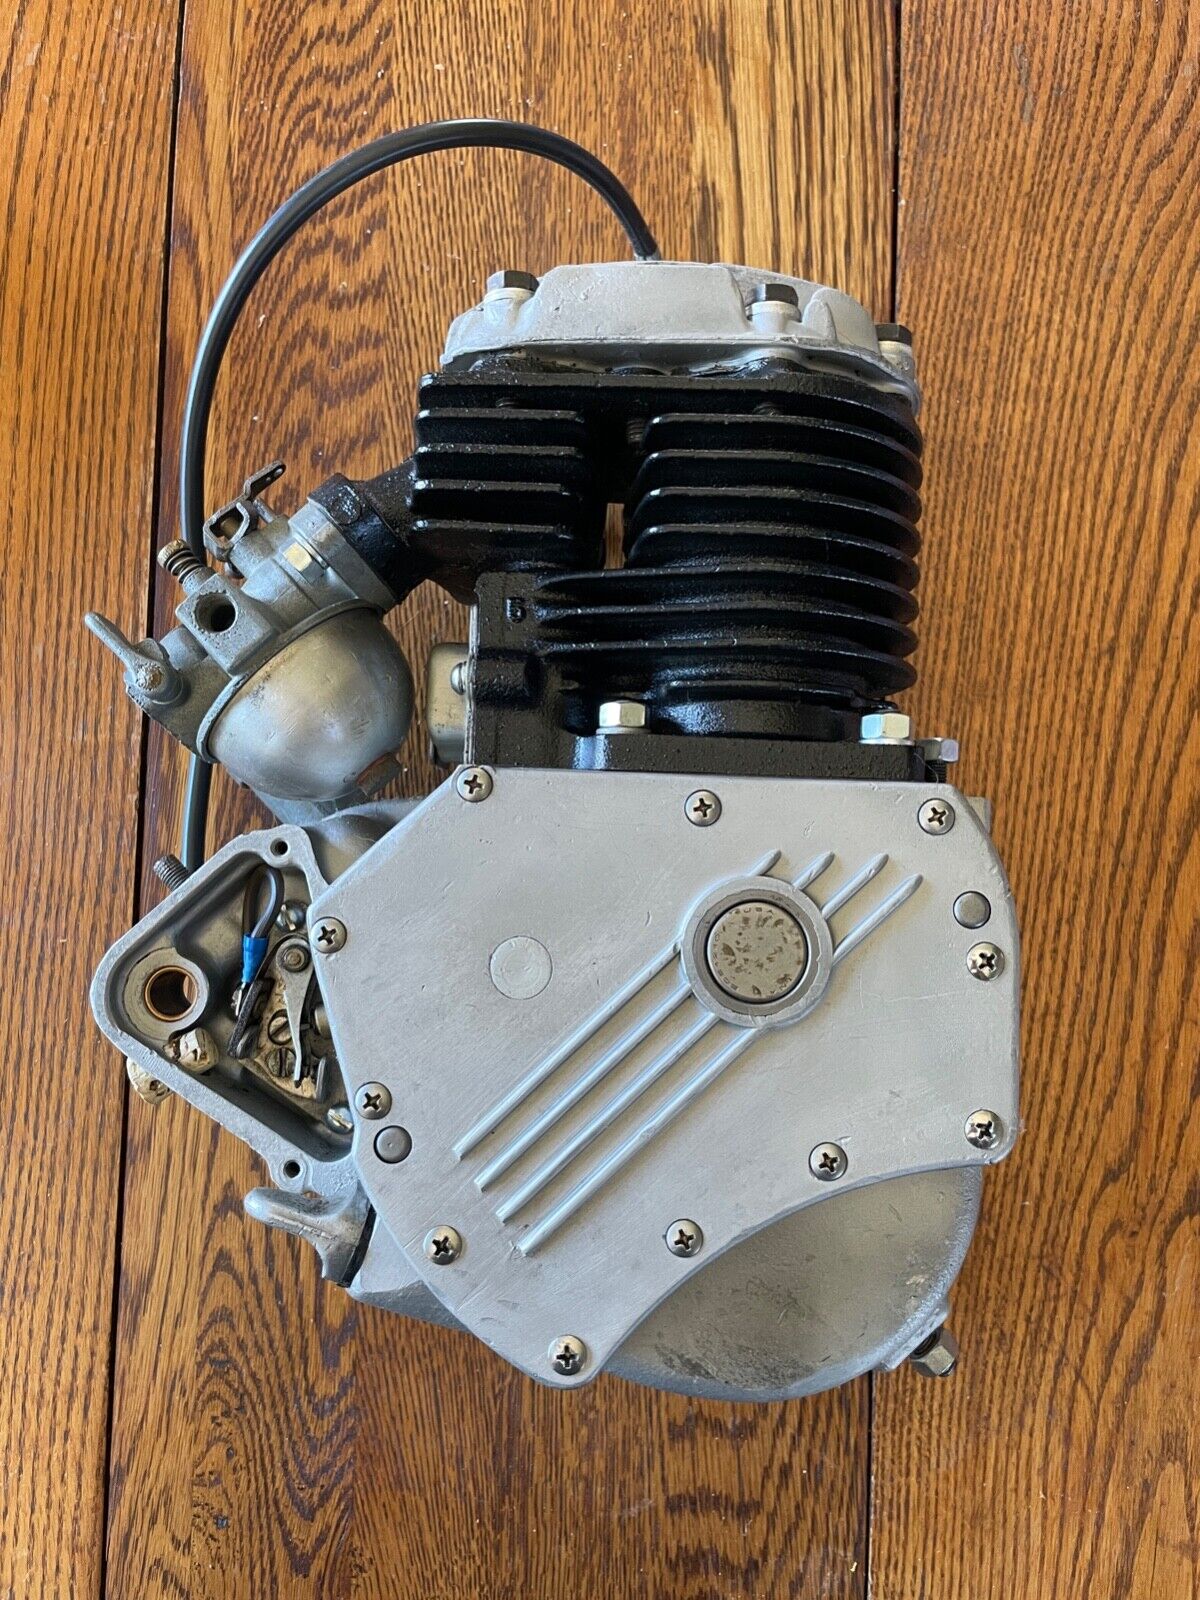 Whizzer J Motor - Professionally Rebuilt And Bench Tested